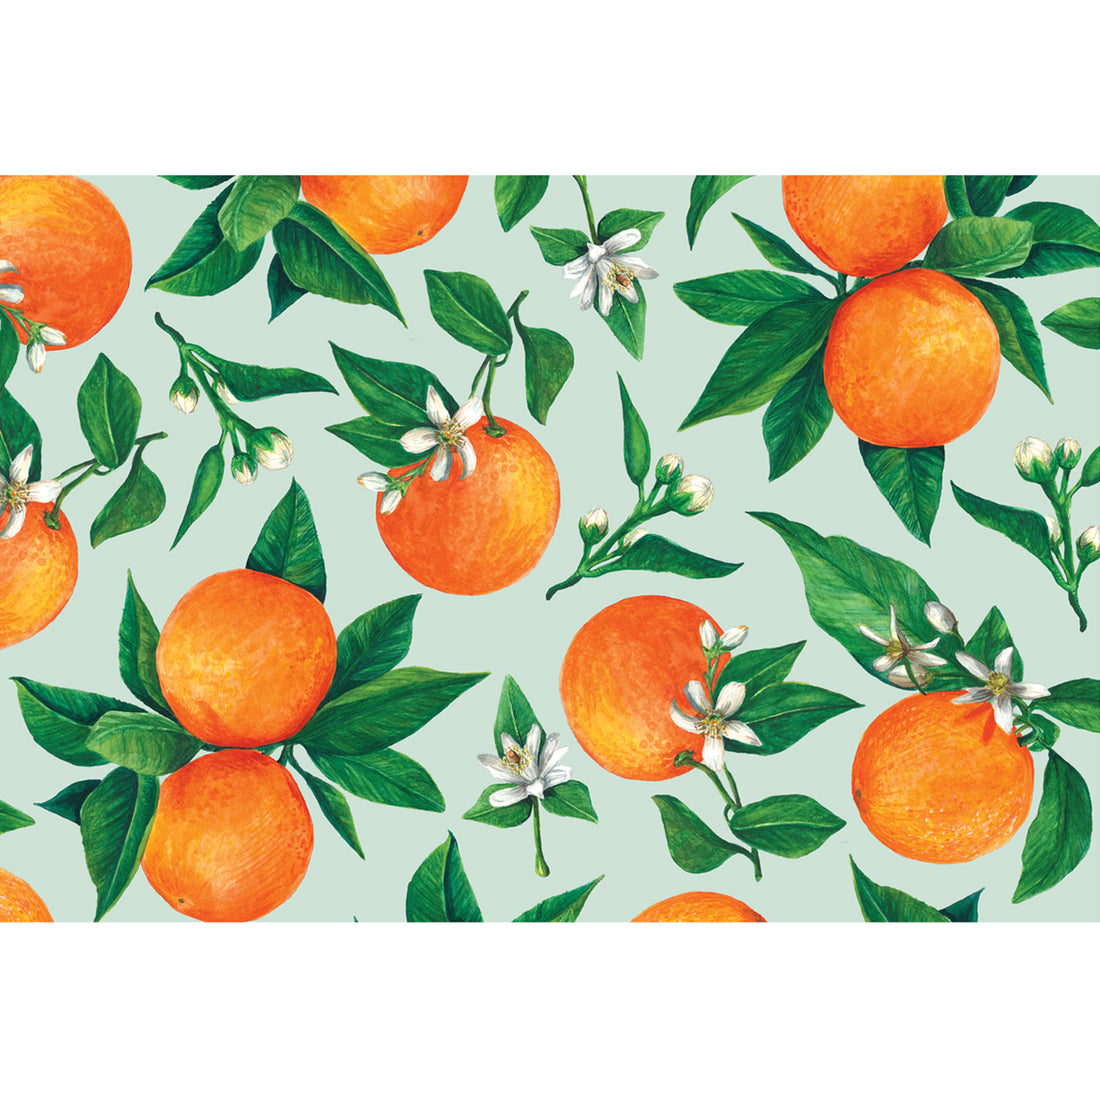 A citrus watercolor pattern with oranges and leaves, perfect for Orange Orchard Placemats by Hester &amp; Cook.